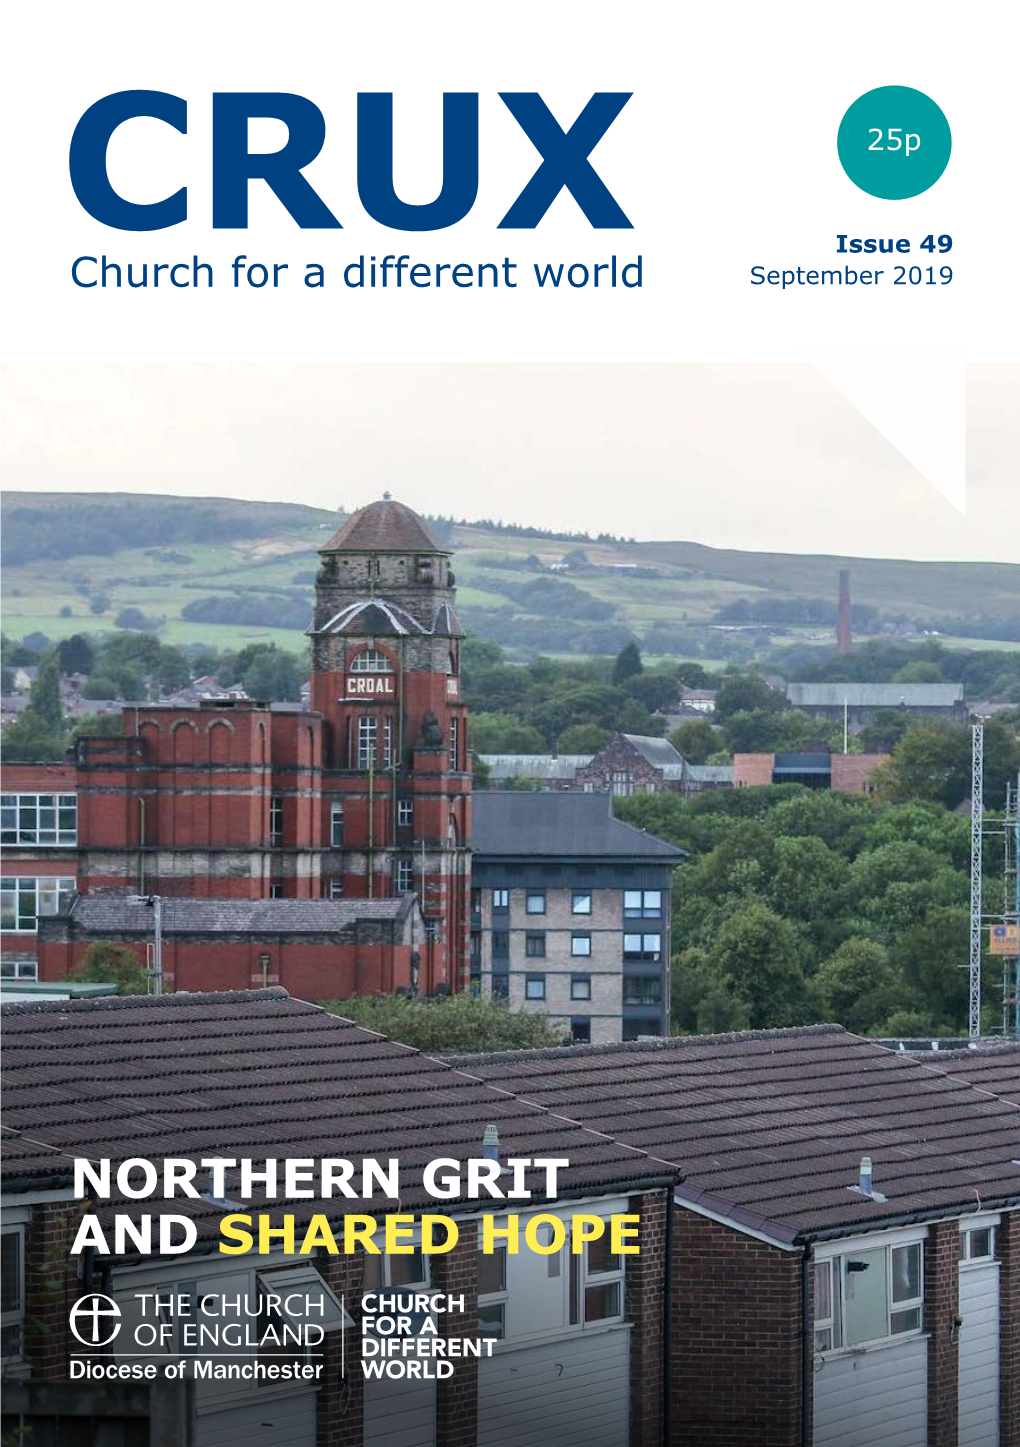 Northern Grit and Shared Hope